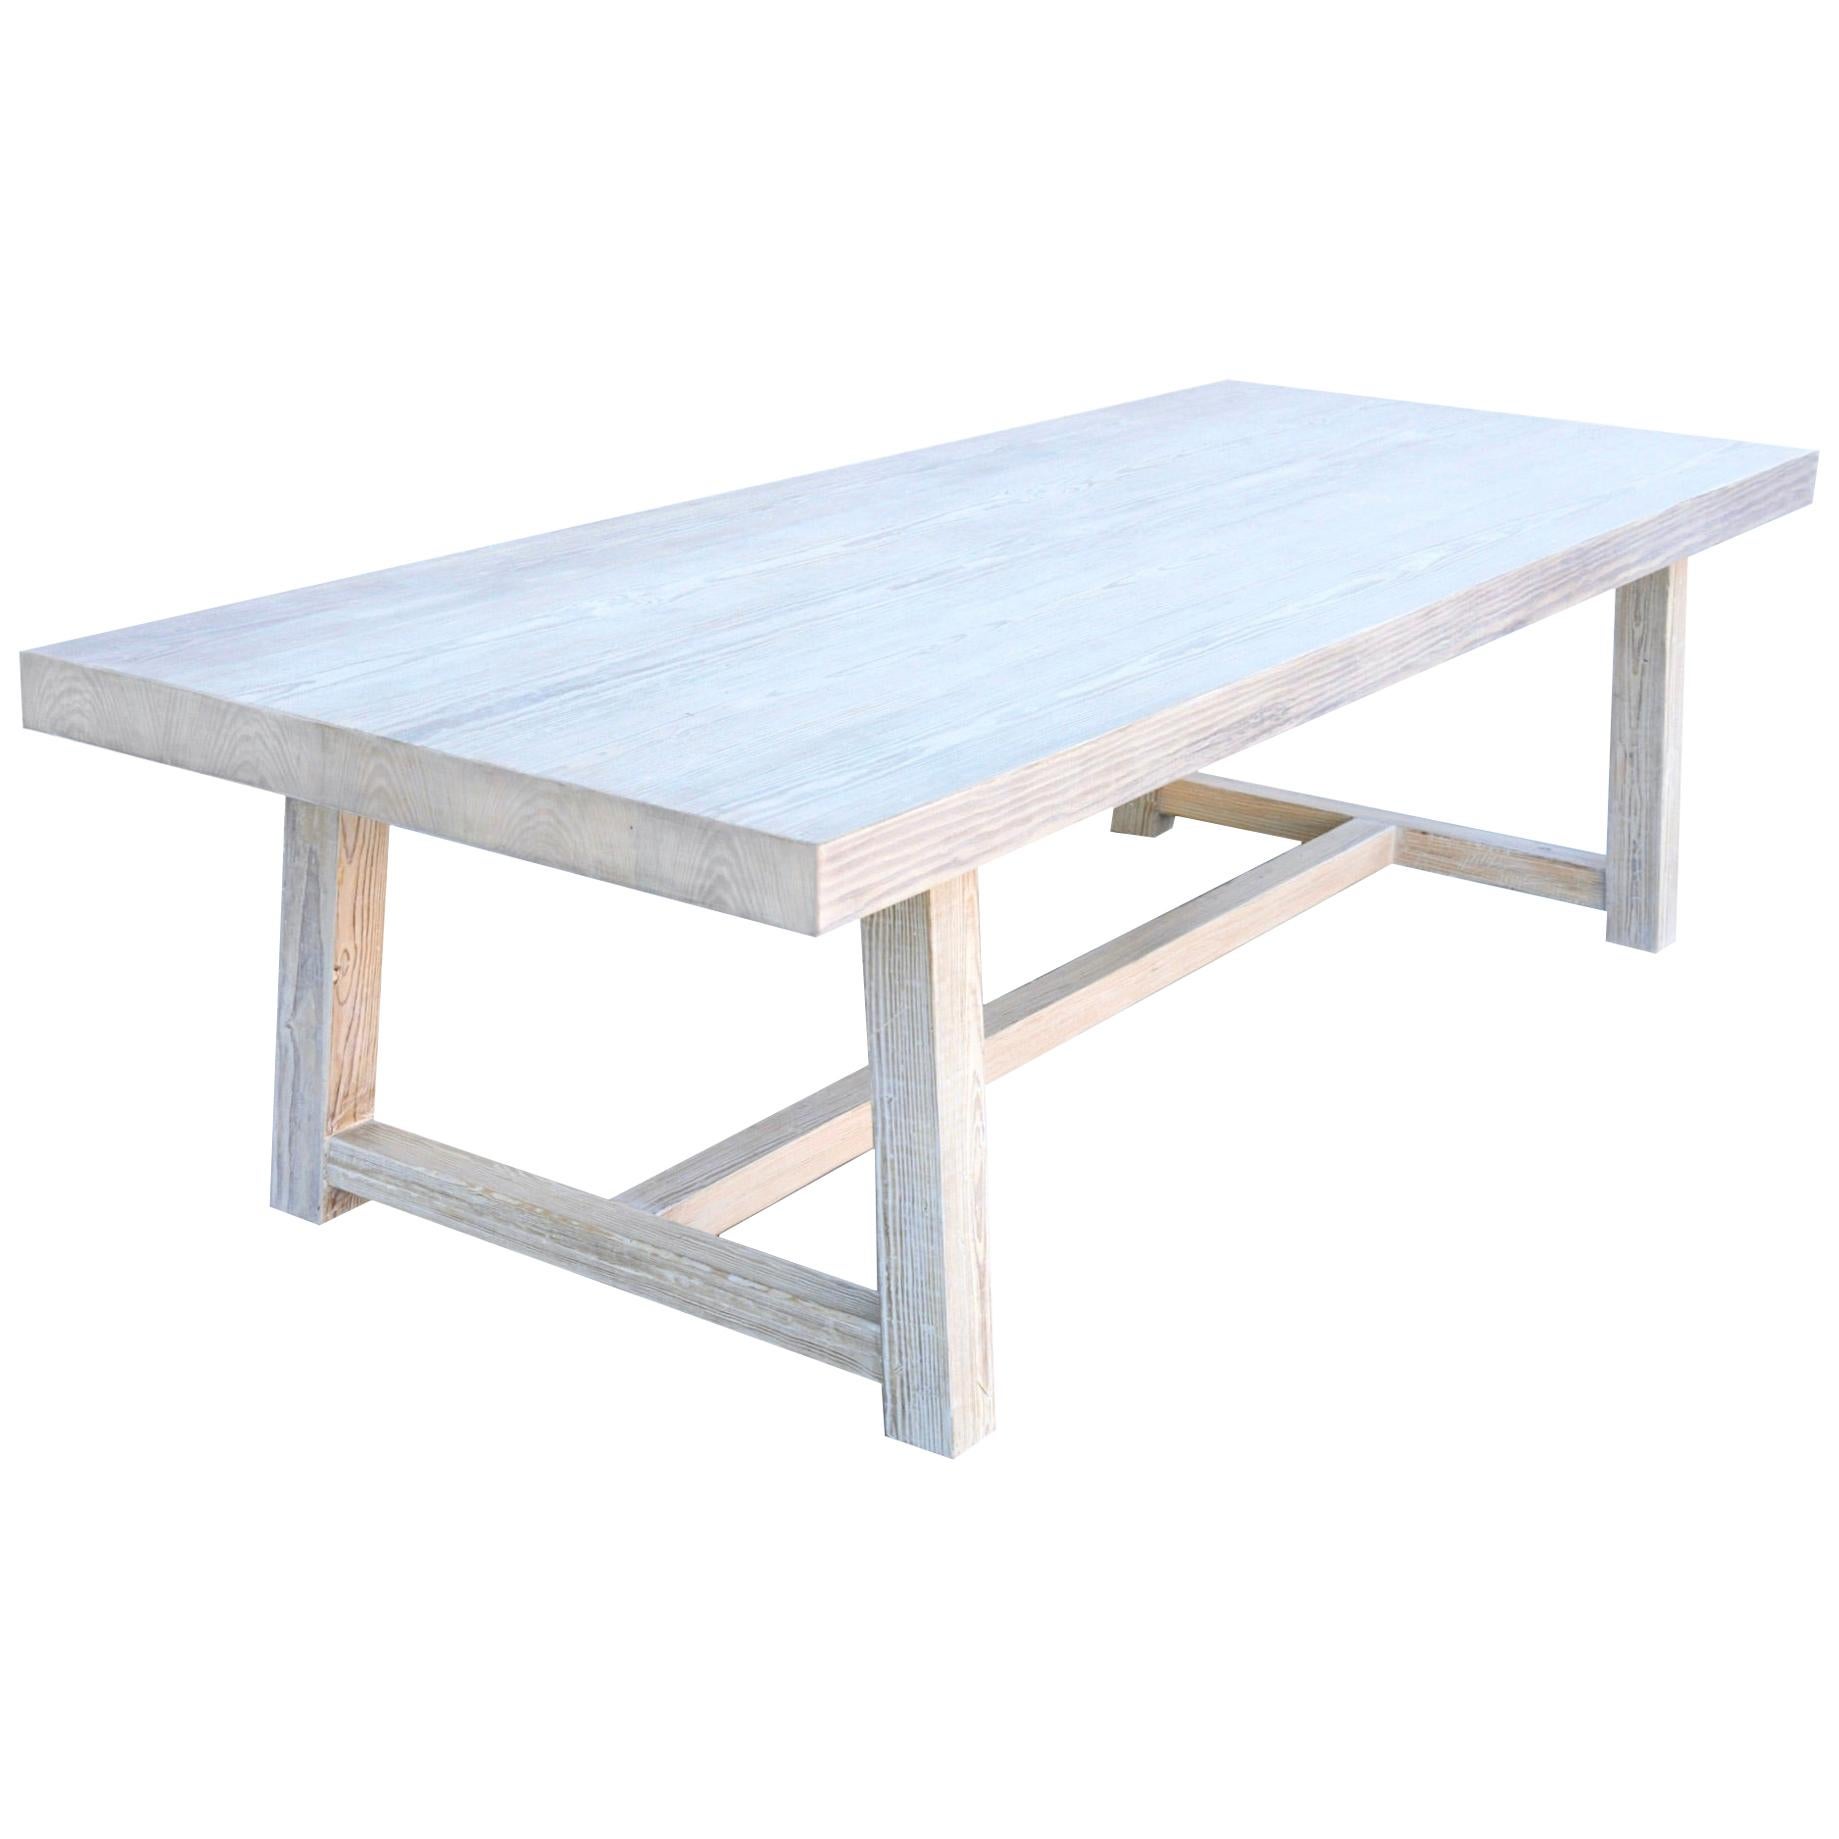 Custom Dining Table made from Reclaimed Pine, Made to Order by Petersen Antiques